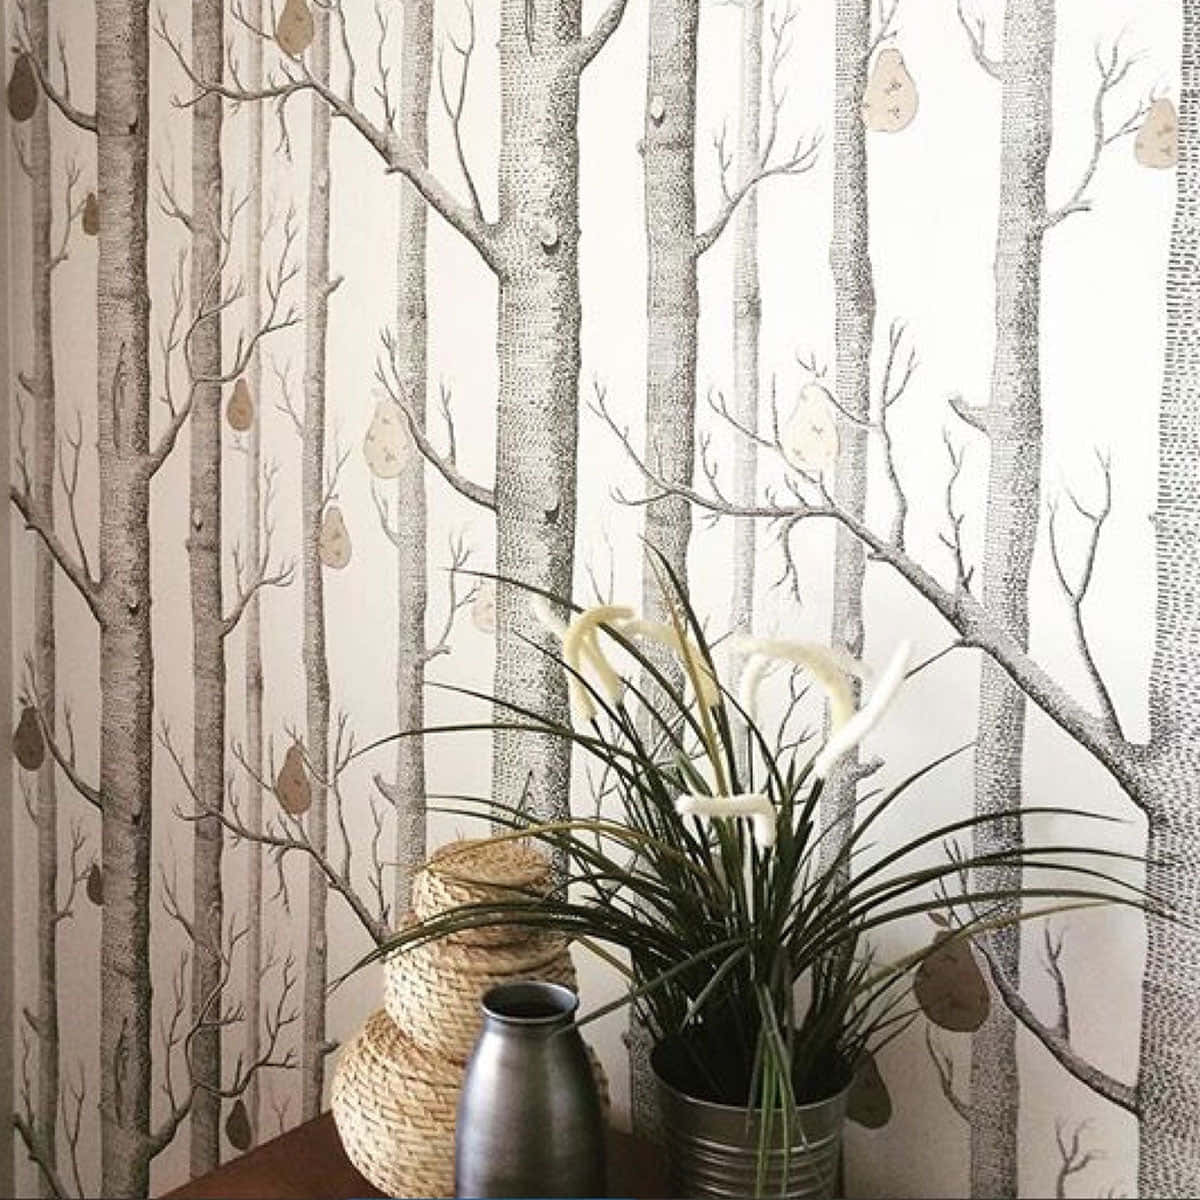 An intricate pattern of swirls and lines, this bronze wallpaper is both detailed and timeless. Wallpaper